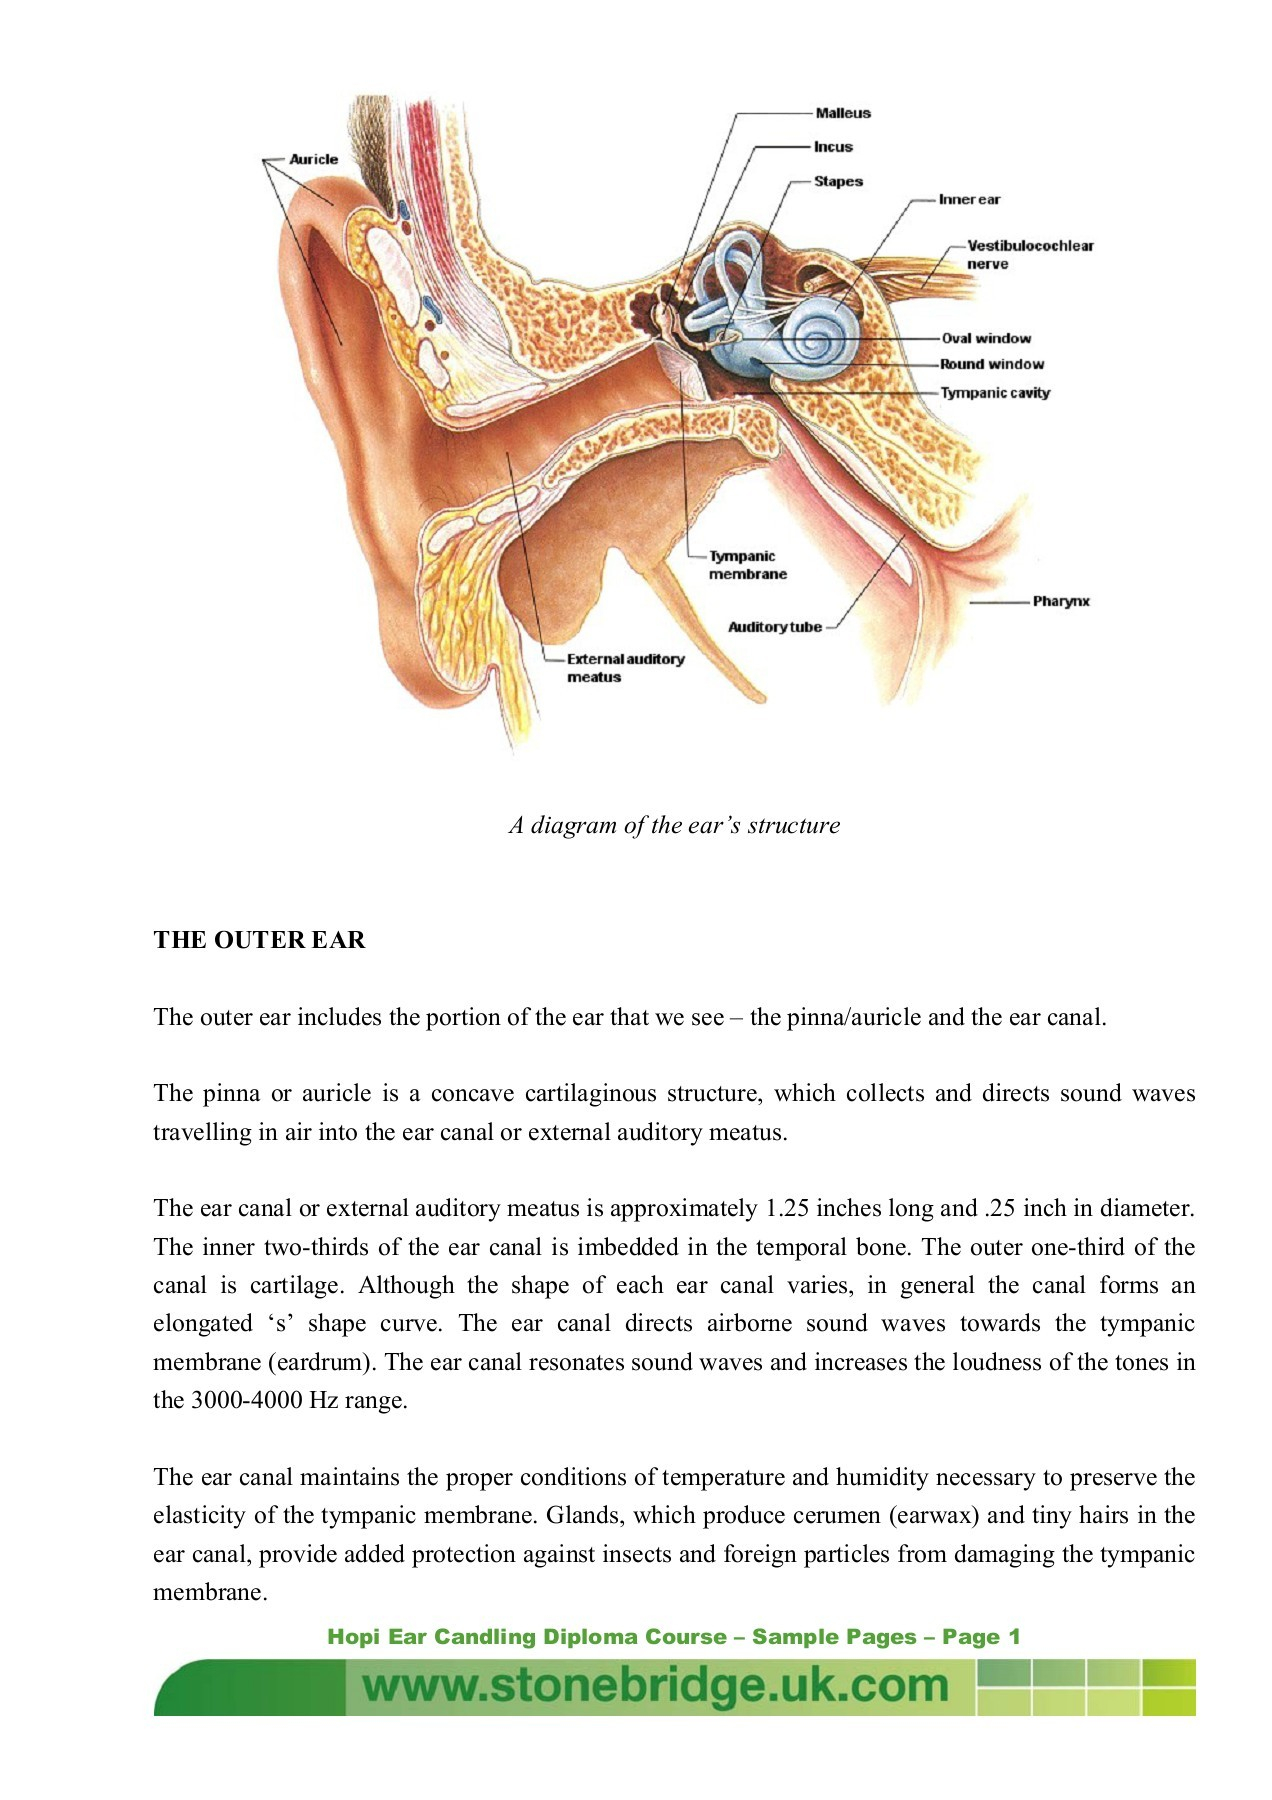 Diagram Of The Ear A Diagram Of The Ears Structure The Outer Ear The Outer